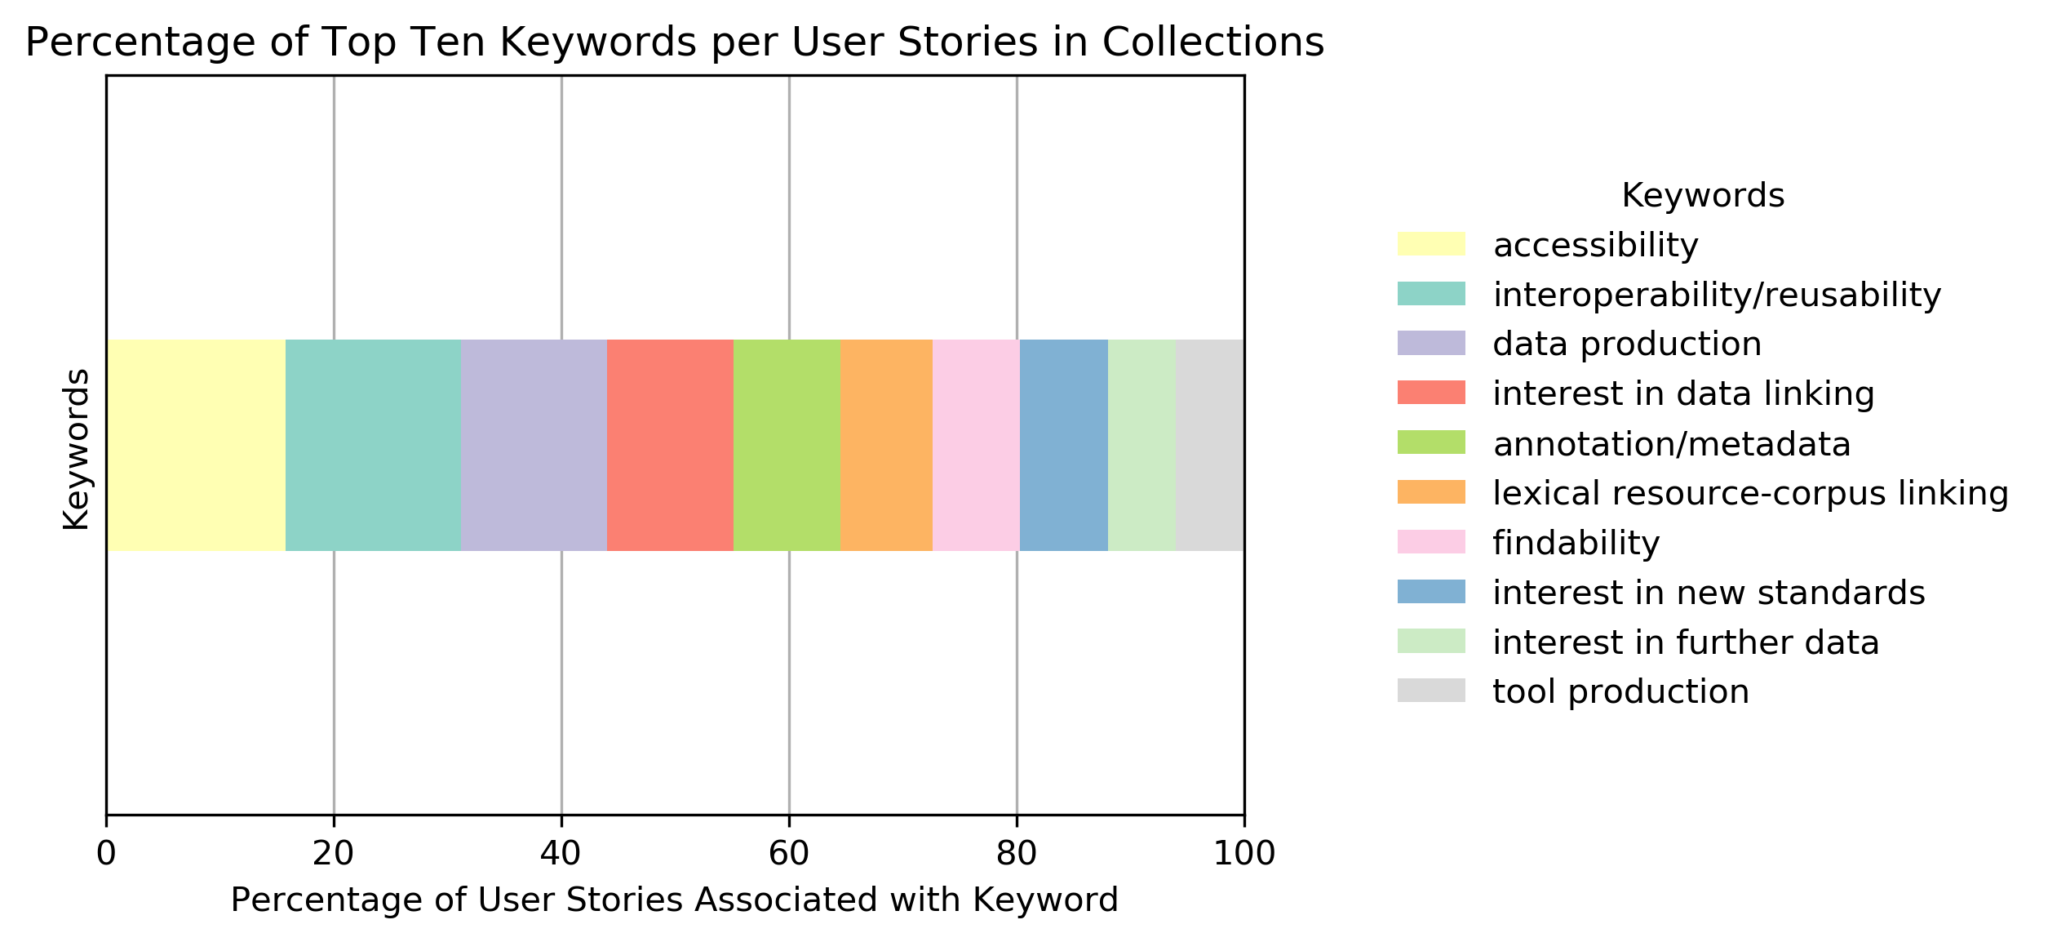 Percentage of User Stories in Collections for the 10 most-used keywords